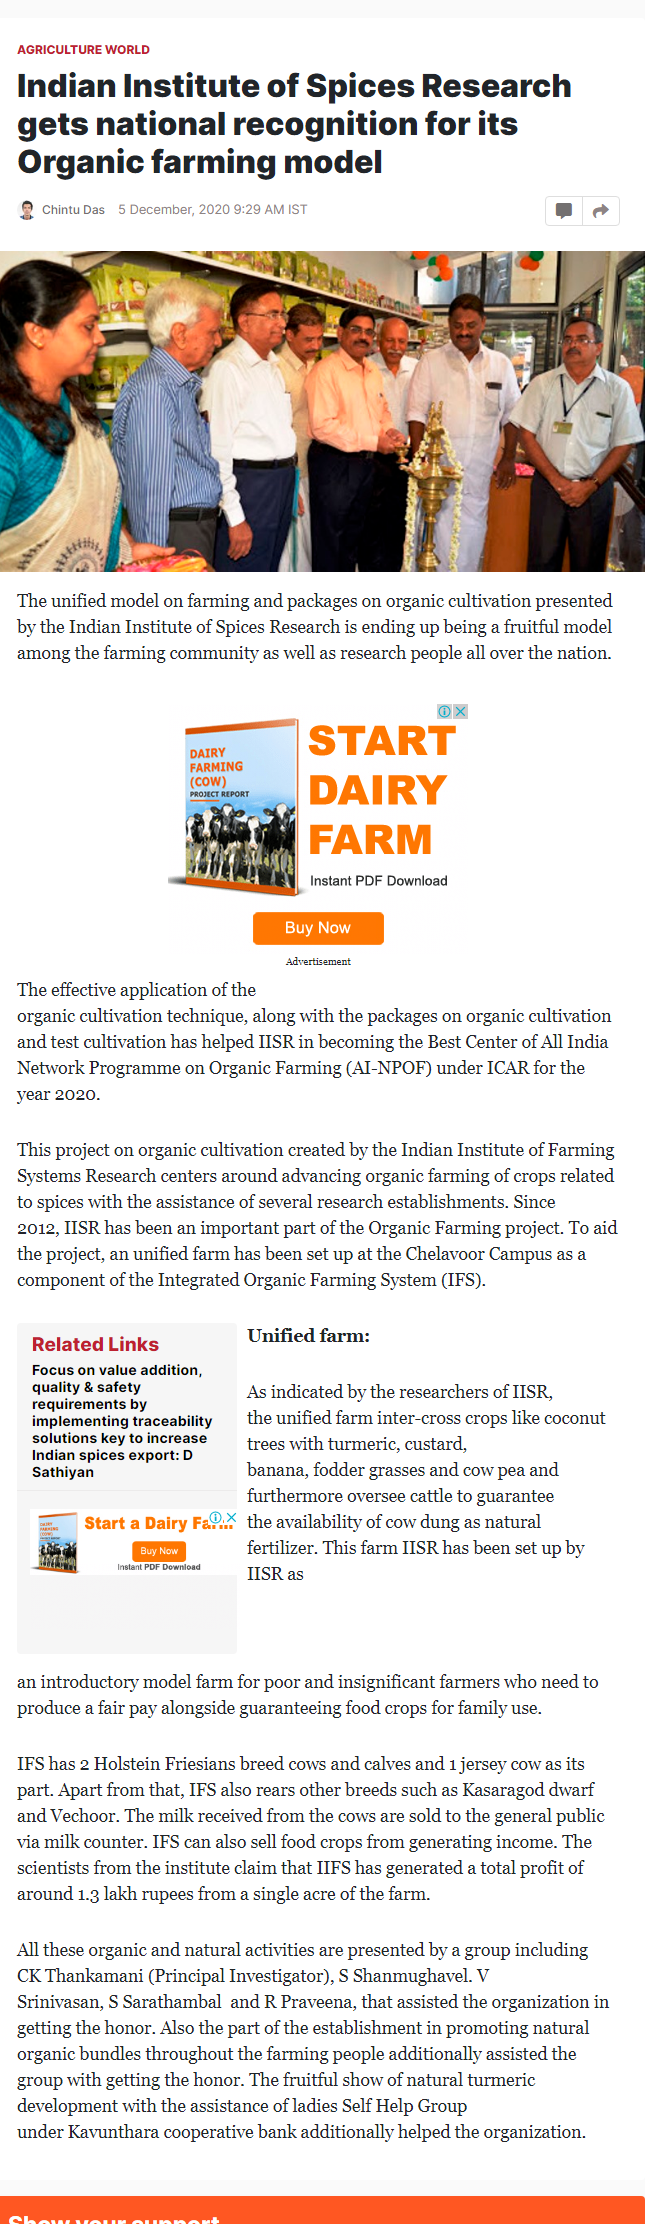 https://krishijagran.com/agriculture-world/indian-institute-of-spices-research-gets-national-recognition-for-its-organic-farming-model/